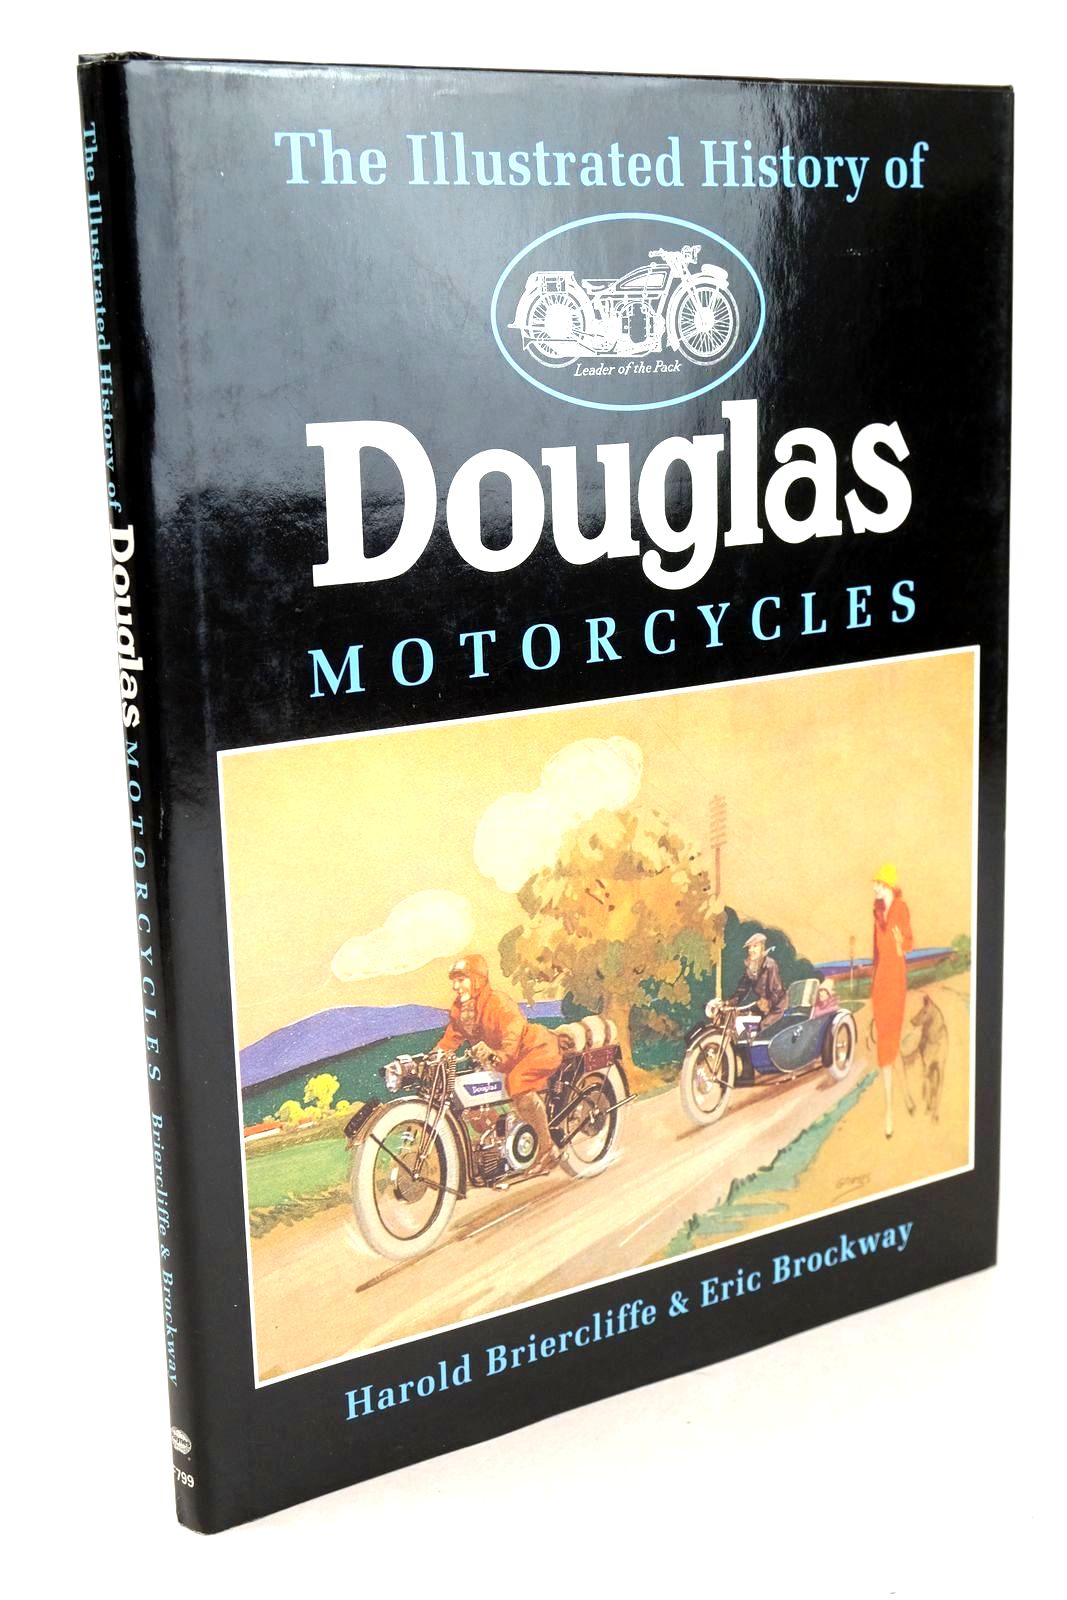 Photo of THE ILLUSTRATED HISTORY OF DOUGLAS MOTORCYCLES written by Briercliffe, Harold Brockway, Eric published by Foulis, Haynes (STOCK CODE: 1326190)  for sale by Stella & Rose's Books